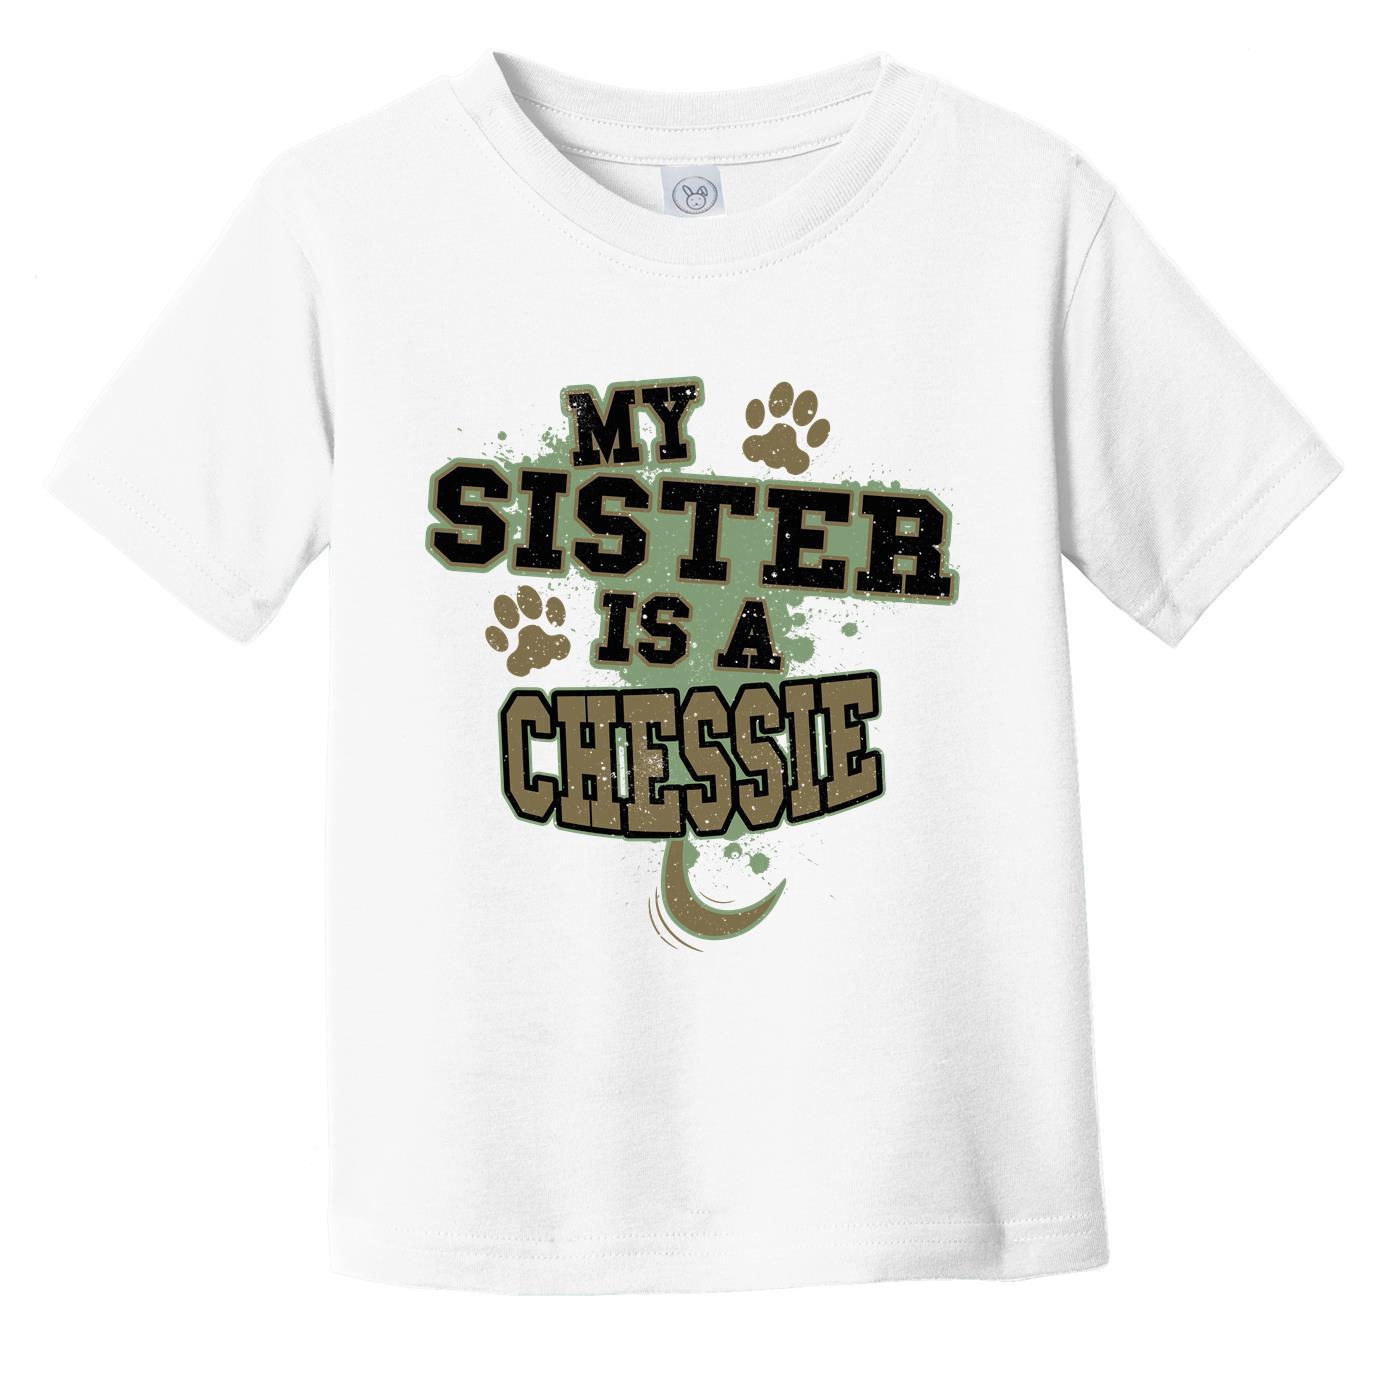 My Sister Is A Chessie Funny Dog Infant Toddler T-Shirt